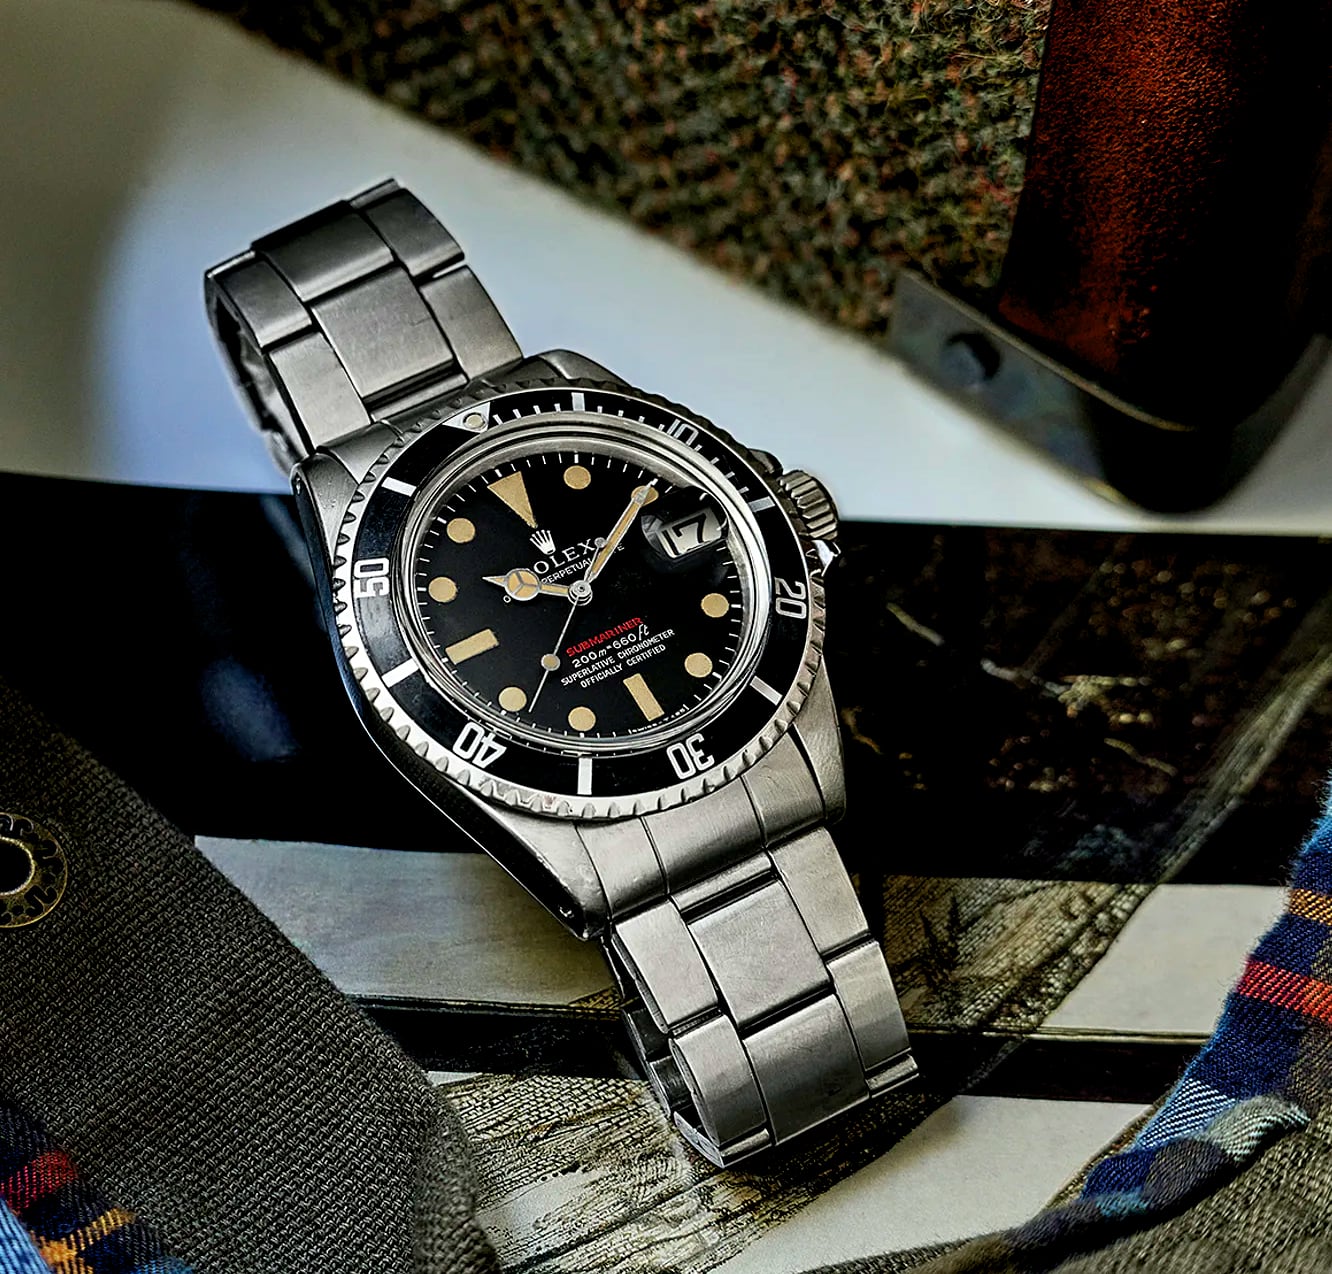 to RolexMagazine.com...Home of Jake's Magazine..Optimized for iPad and iPhone: HODINKEE 1969 ROLEX SINGLE RED SUBMARINER